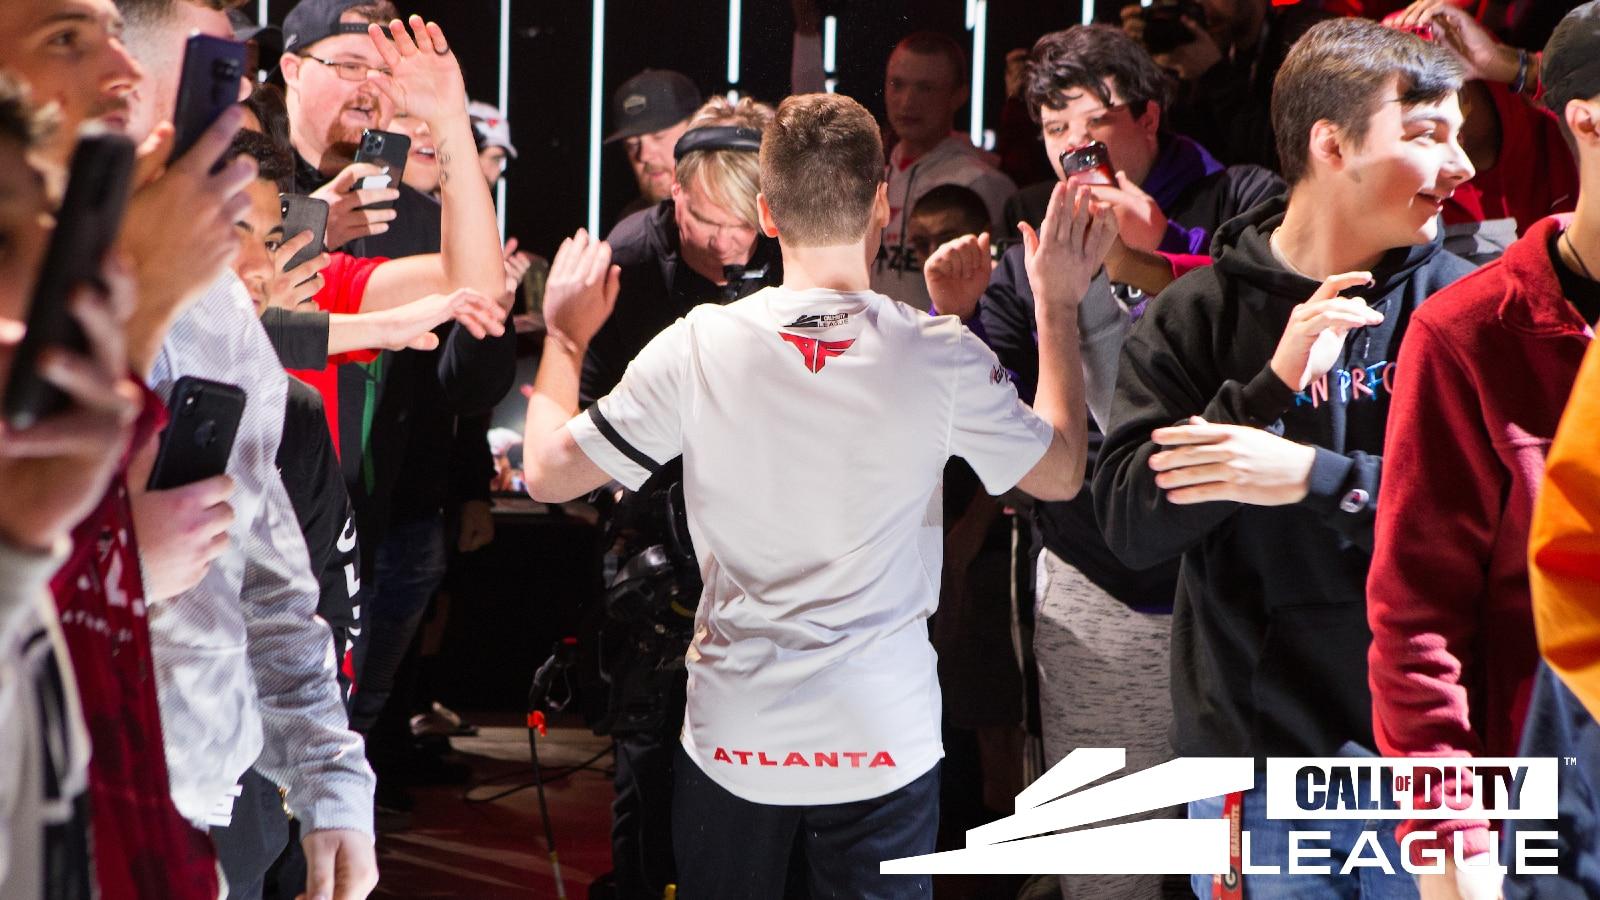 Greatest CoD upset ever Surge eliminate FaZe from Stage 5 Major